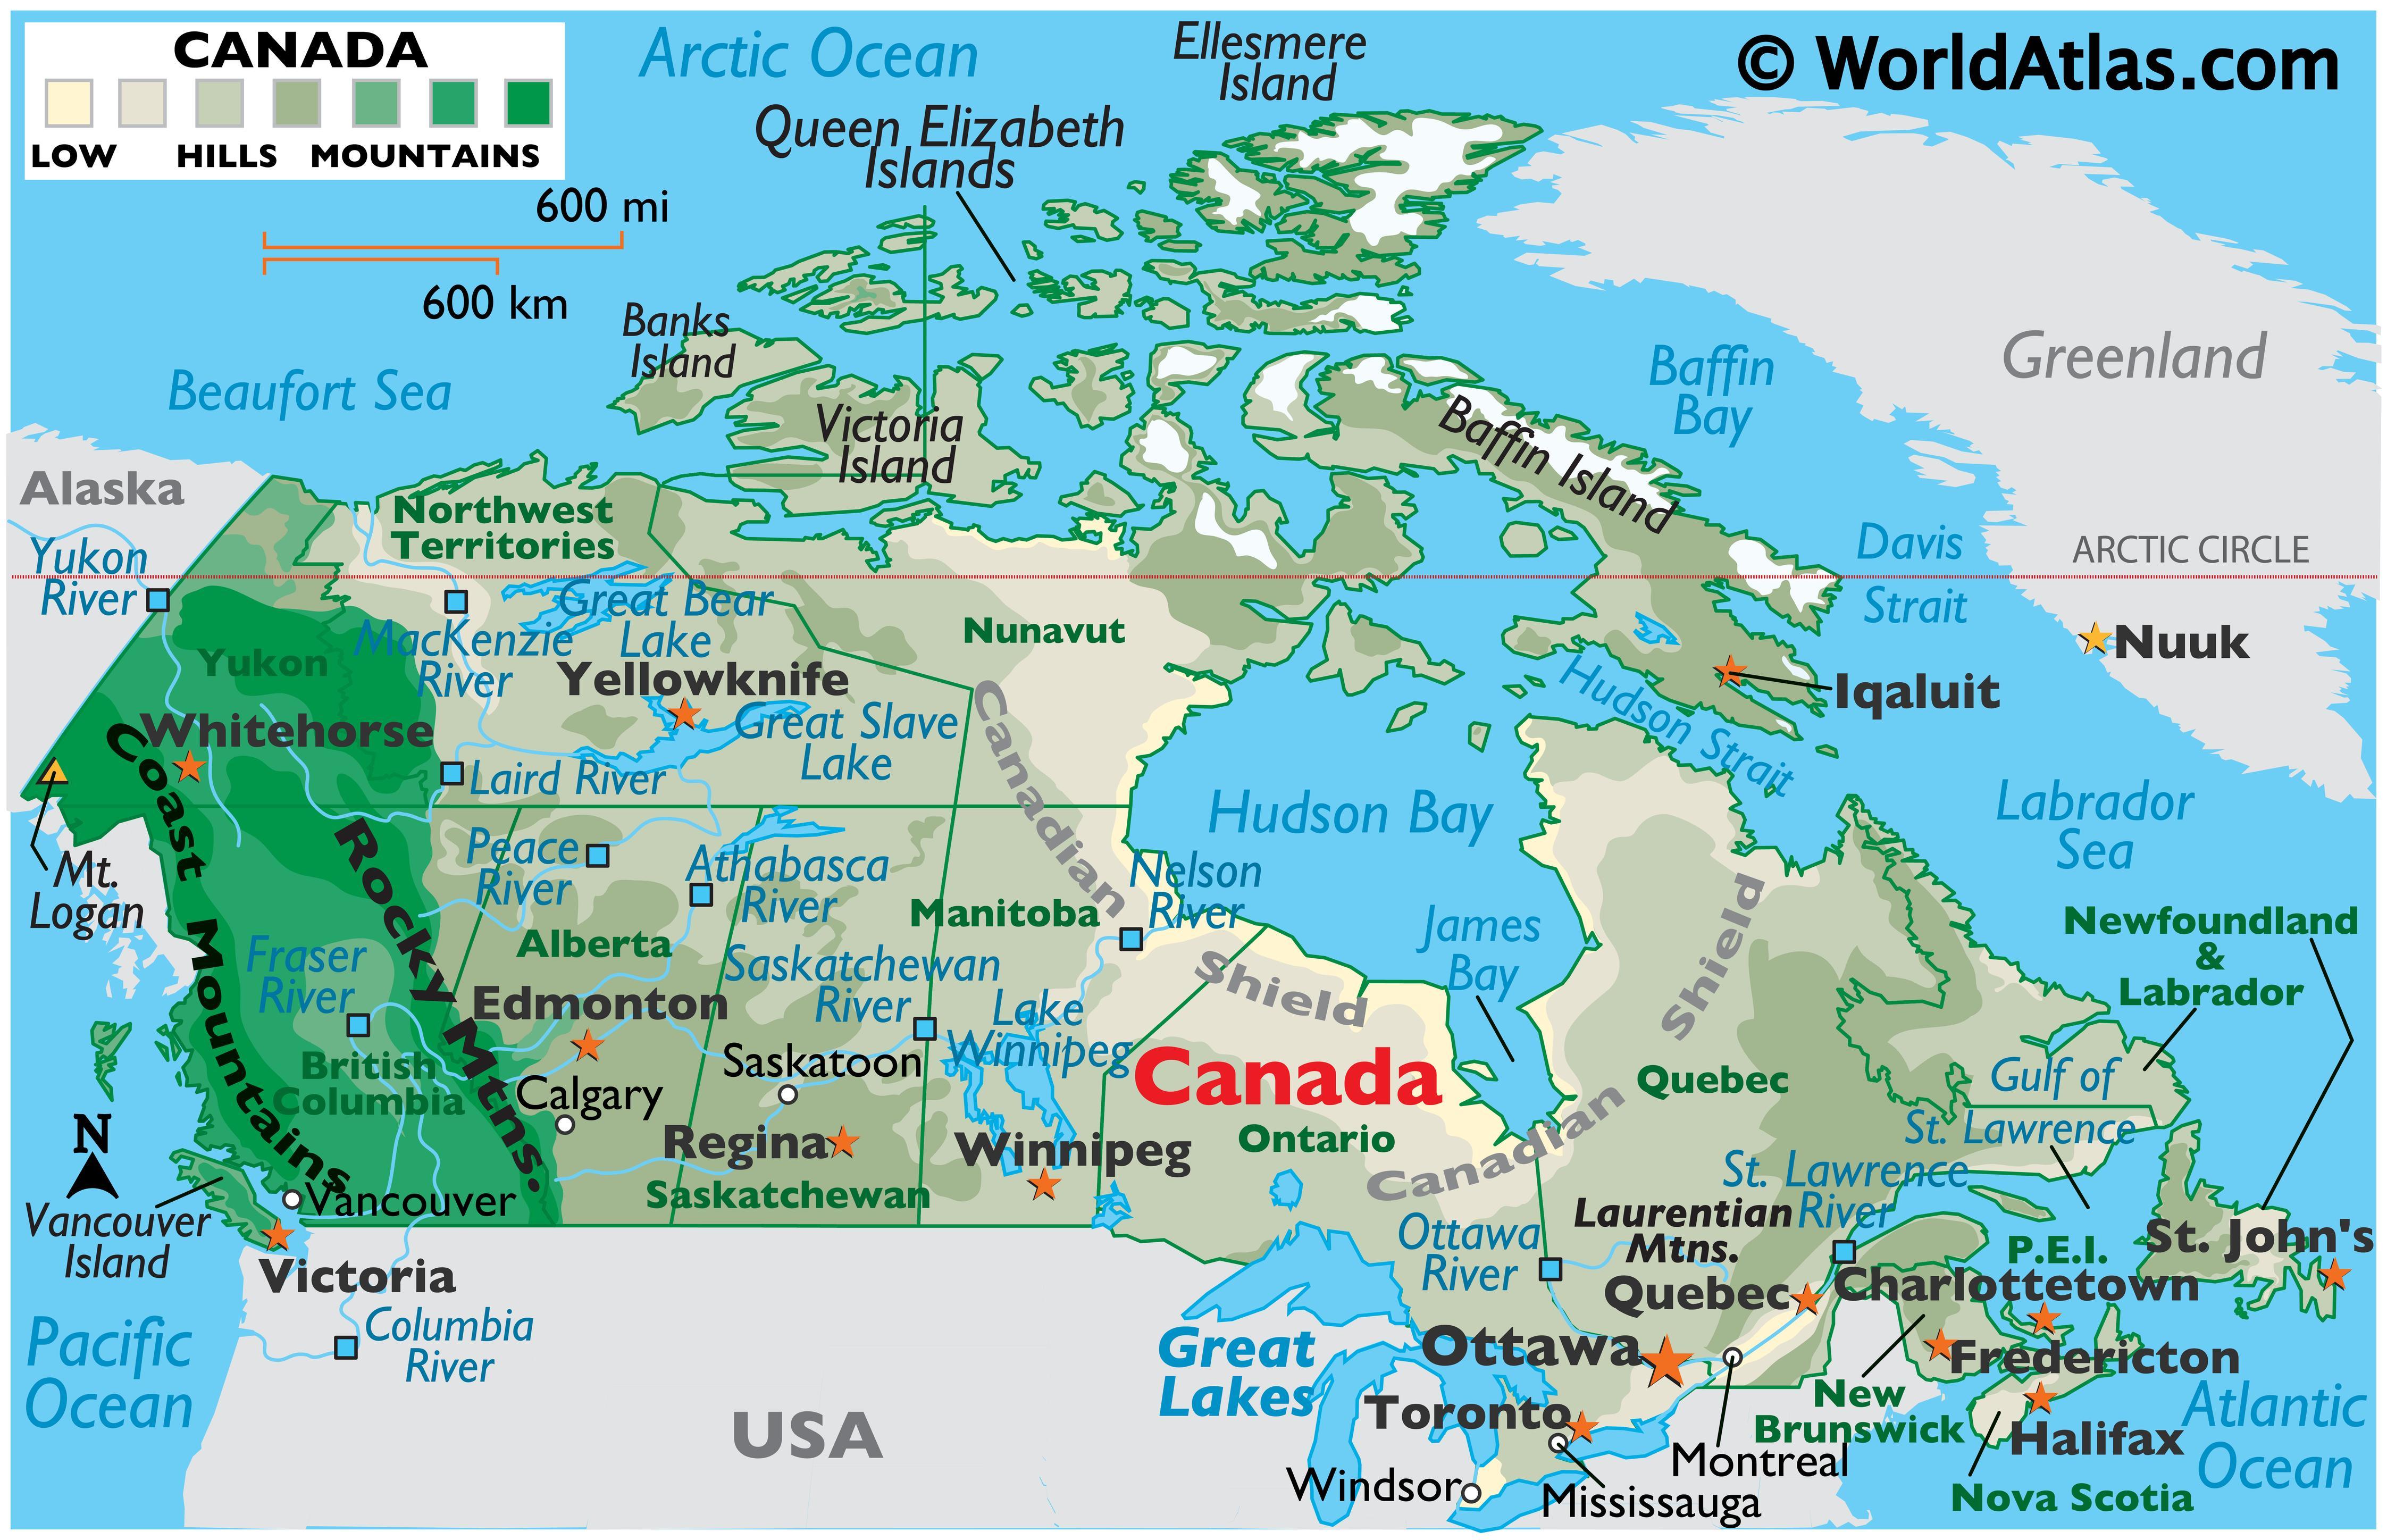 Canada Map / Map of Canada - Maps and Information About Canada